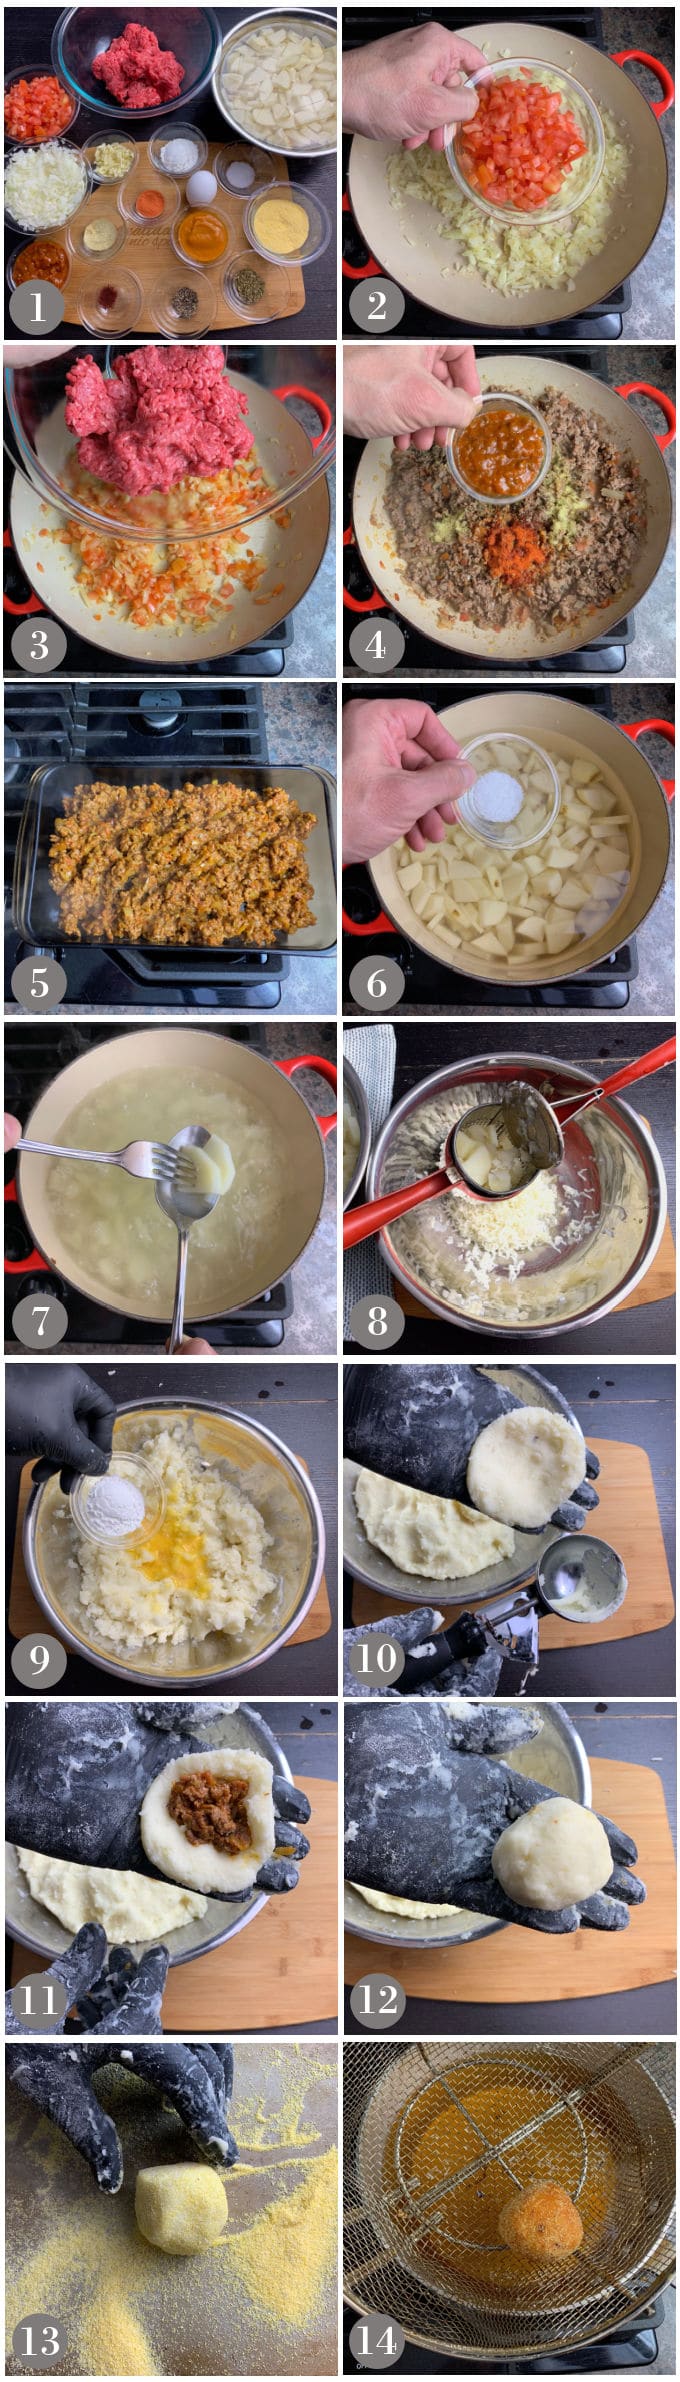 A collage of photos showing the steps to make papas rellenas dough, filling then fill and fry them.